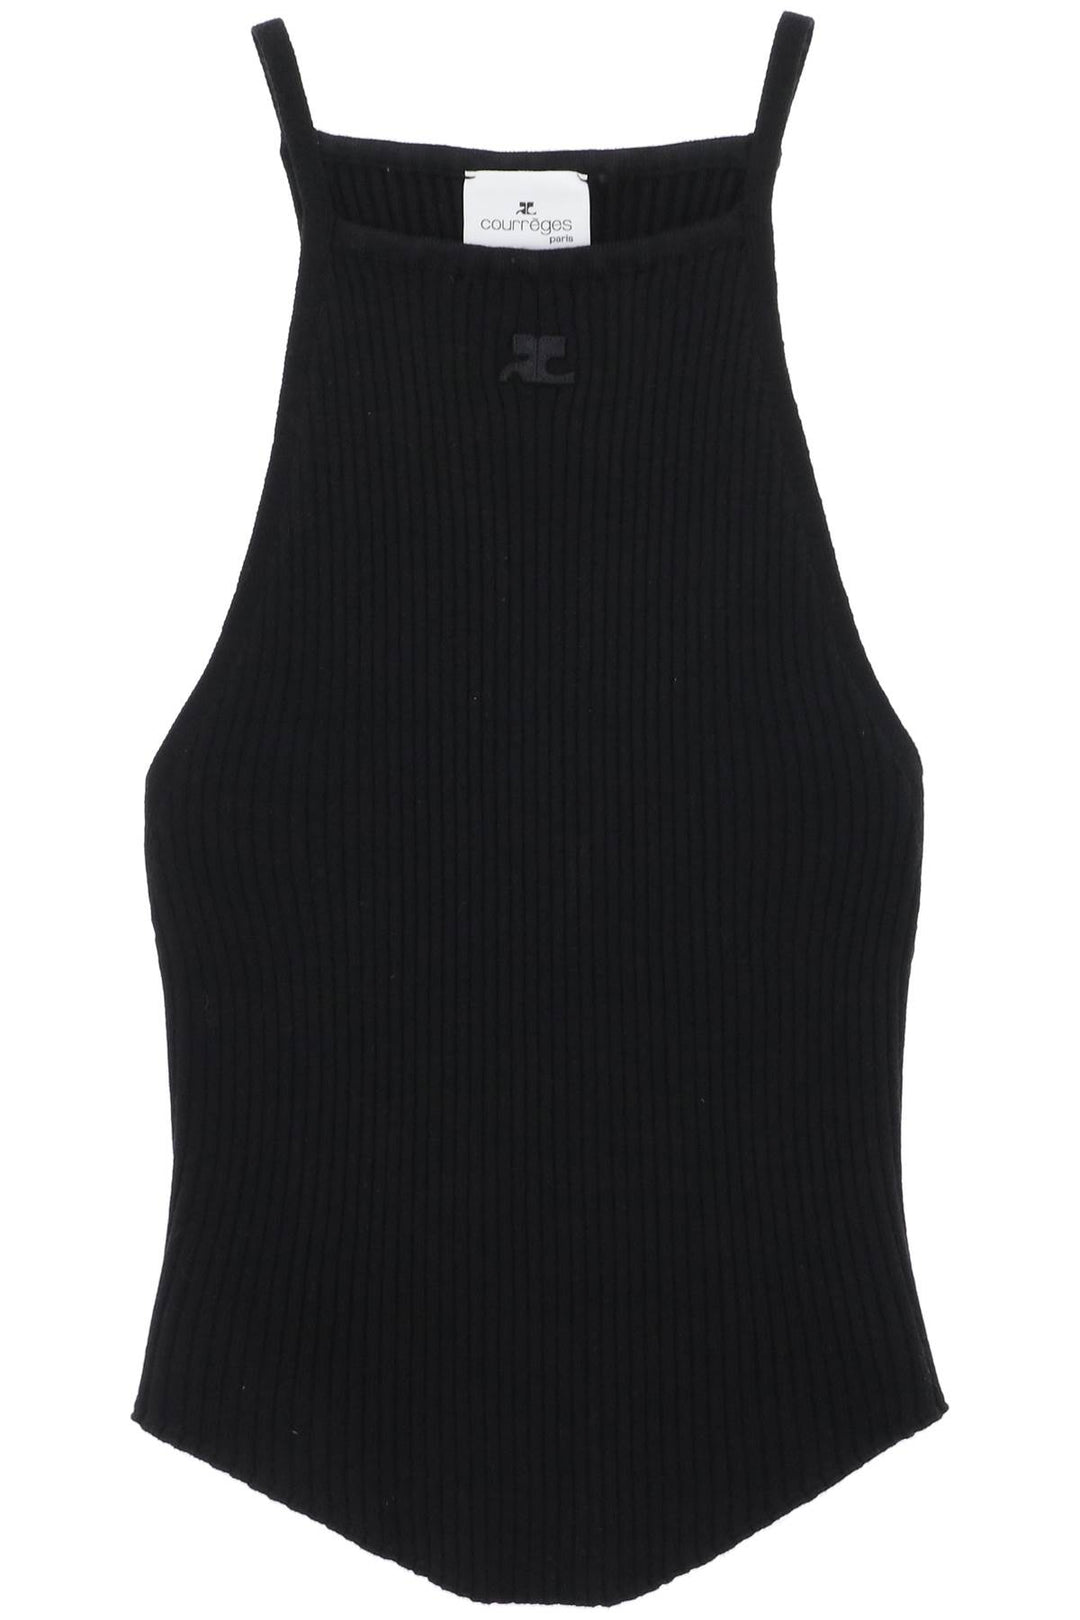 Courreges "ribbed knit holistic top-0